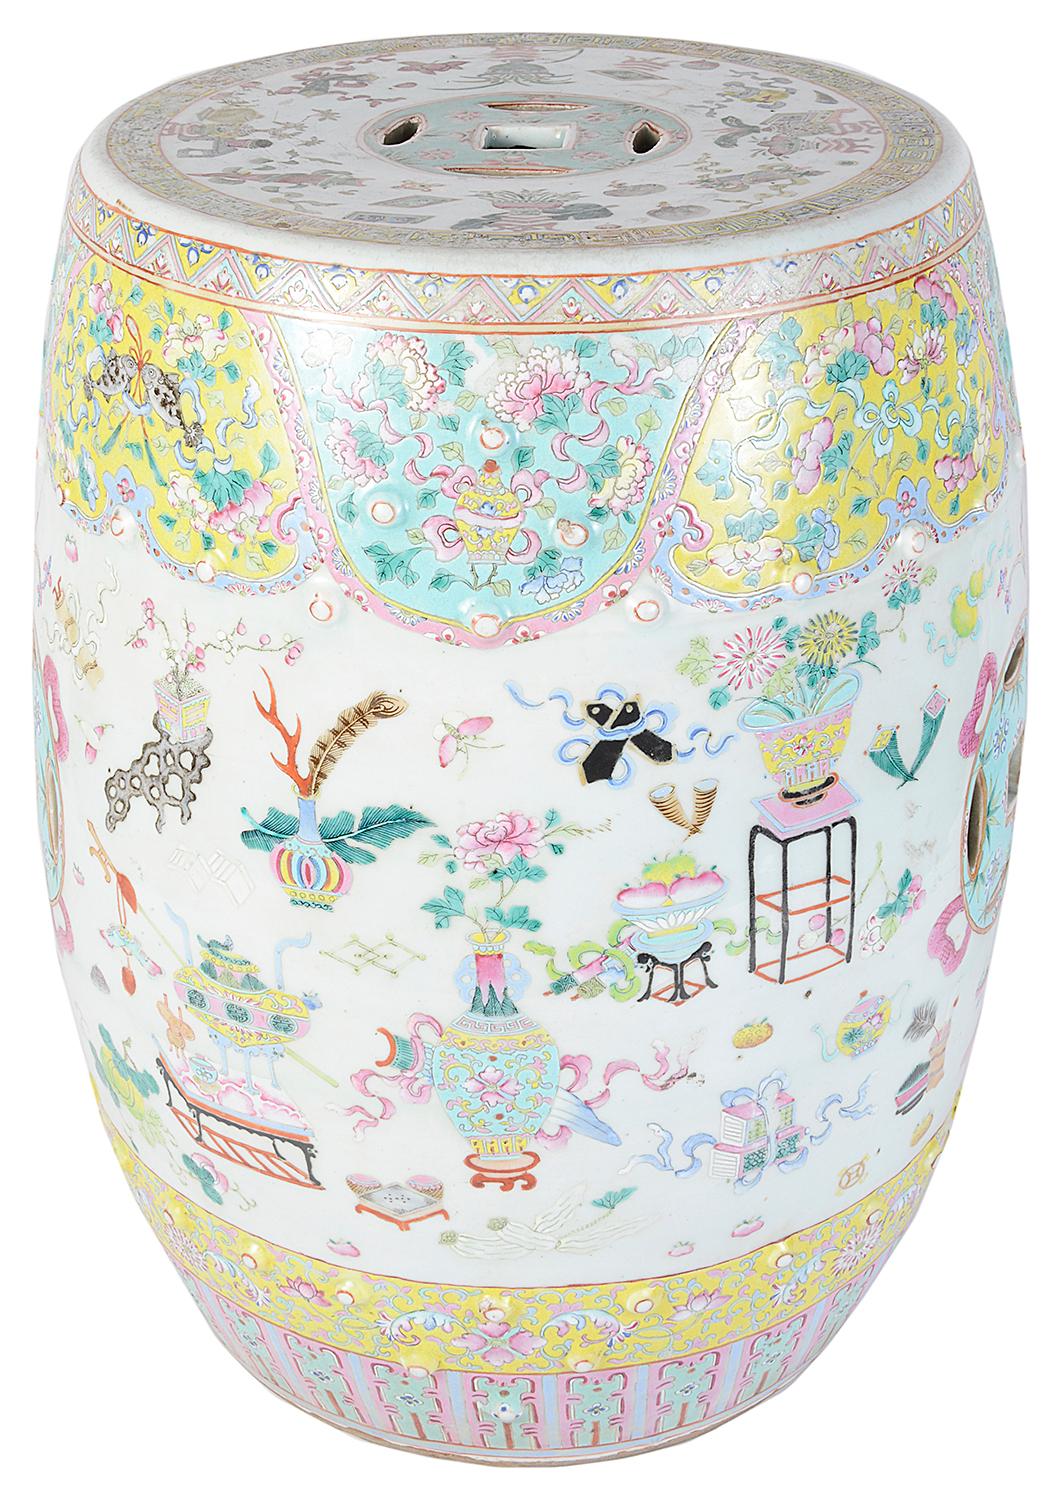 A good quality Chinese Famille rose porcelain garden seat, having turquoise and yellow ground with classical flowers, motifs, the central ban with ribbons, vases of flowers and various furniture etc. The seat and sides with piercing.